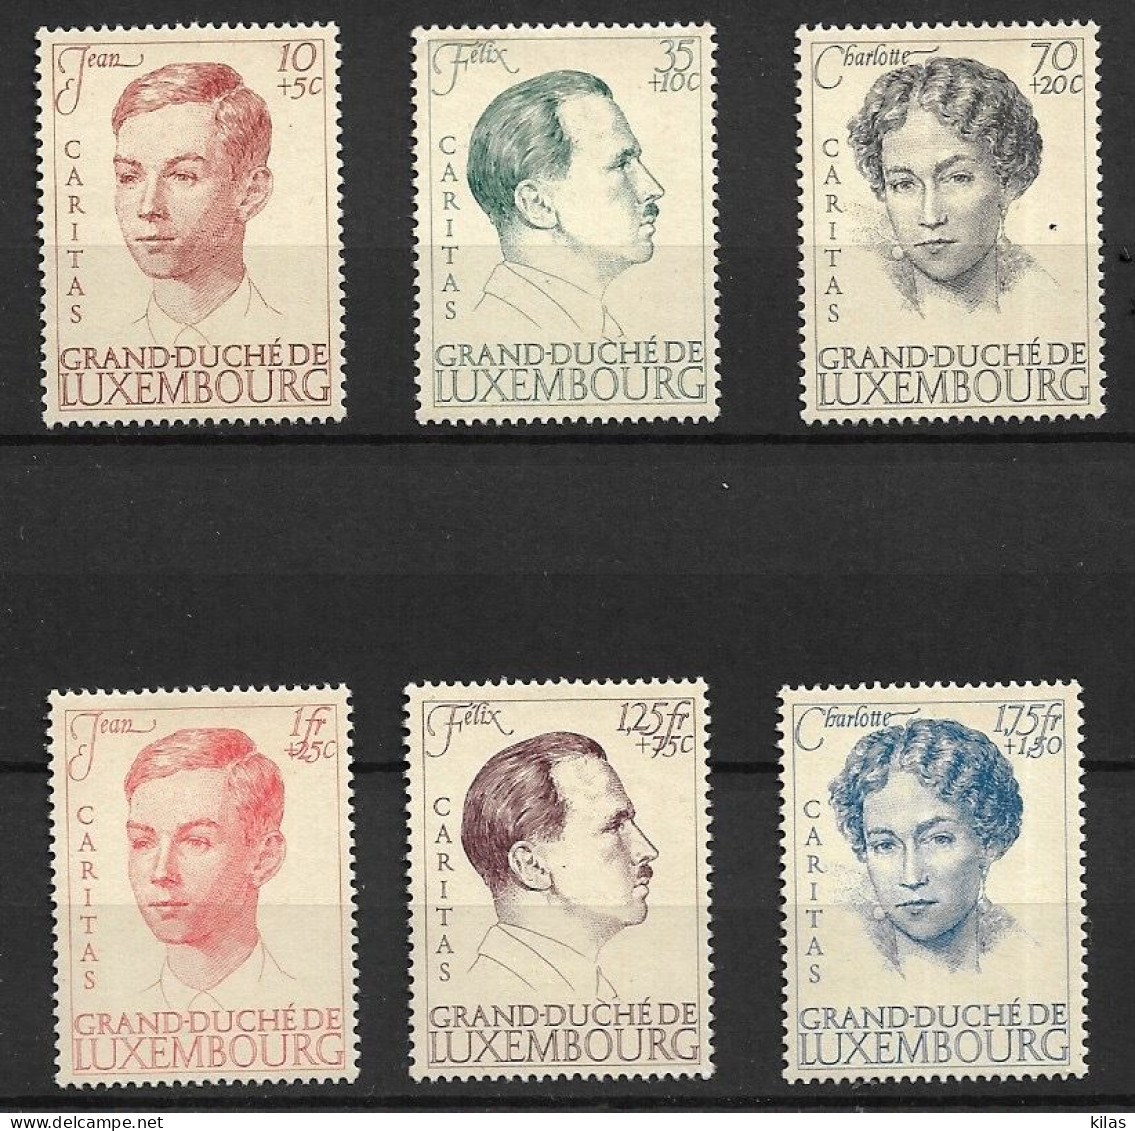 LUXEMBOURG 1939 20TH ANNIVERSARY OF THE REIGN OF THE GRAND DUCHESS CHARLOTTE MNH - 1948-58 Charlotte Linkerkant